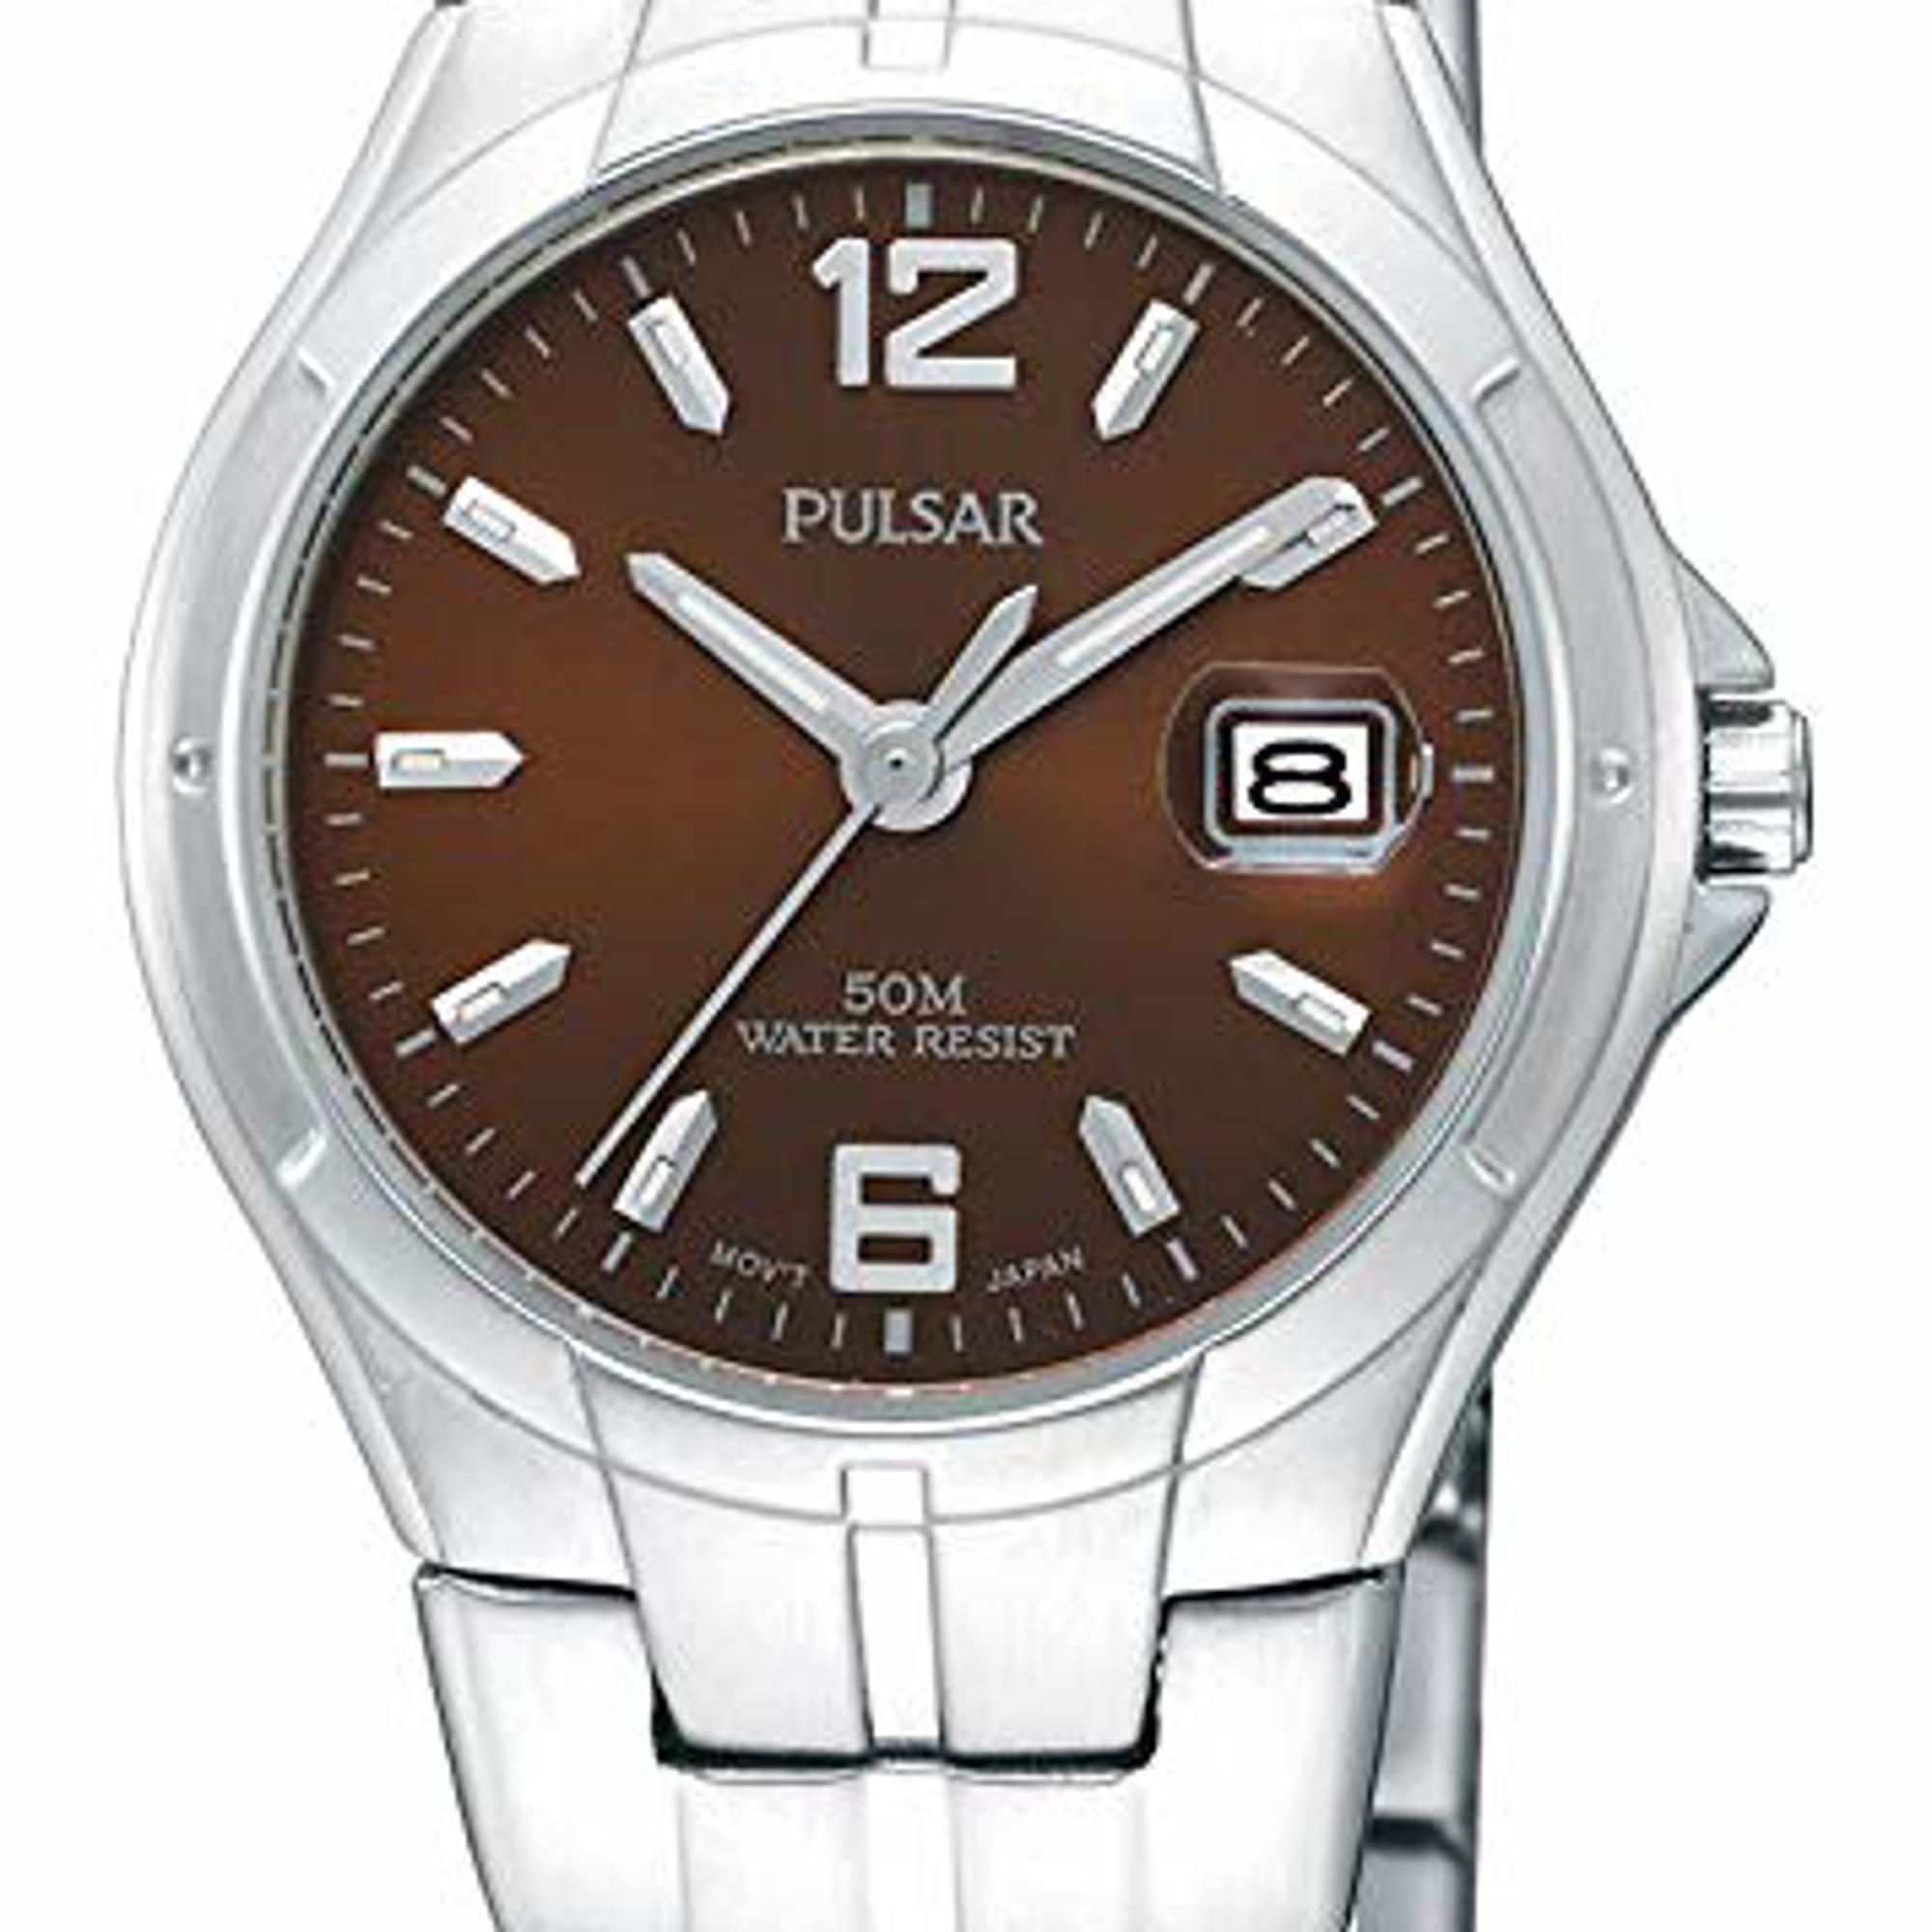 Display Model Pulsar Date 27mm Stainless Steel Brown Dial Ladies Quartz Watch PXT741. This Beautiful Timepiece is Powered by a Quartz (Battery) Movement and Features: Stainless Steel case and Bracelet, Fixed Stainless Steel Bezel, Brown Dial with